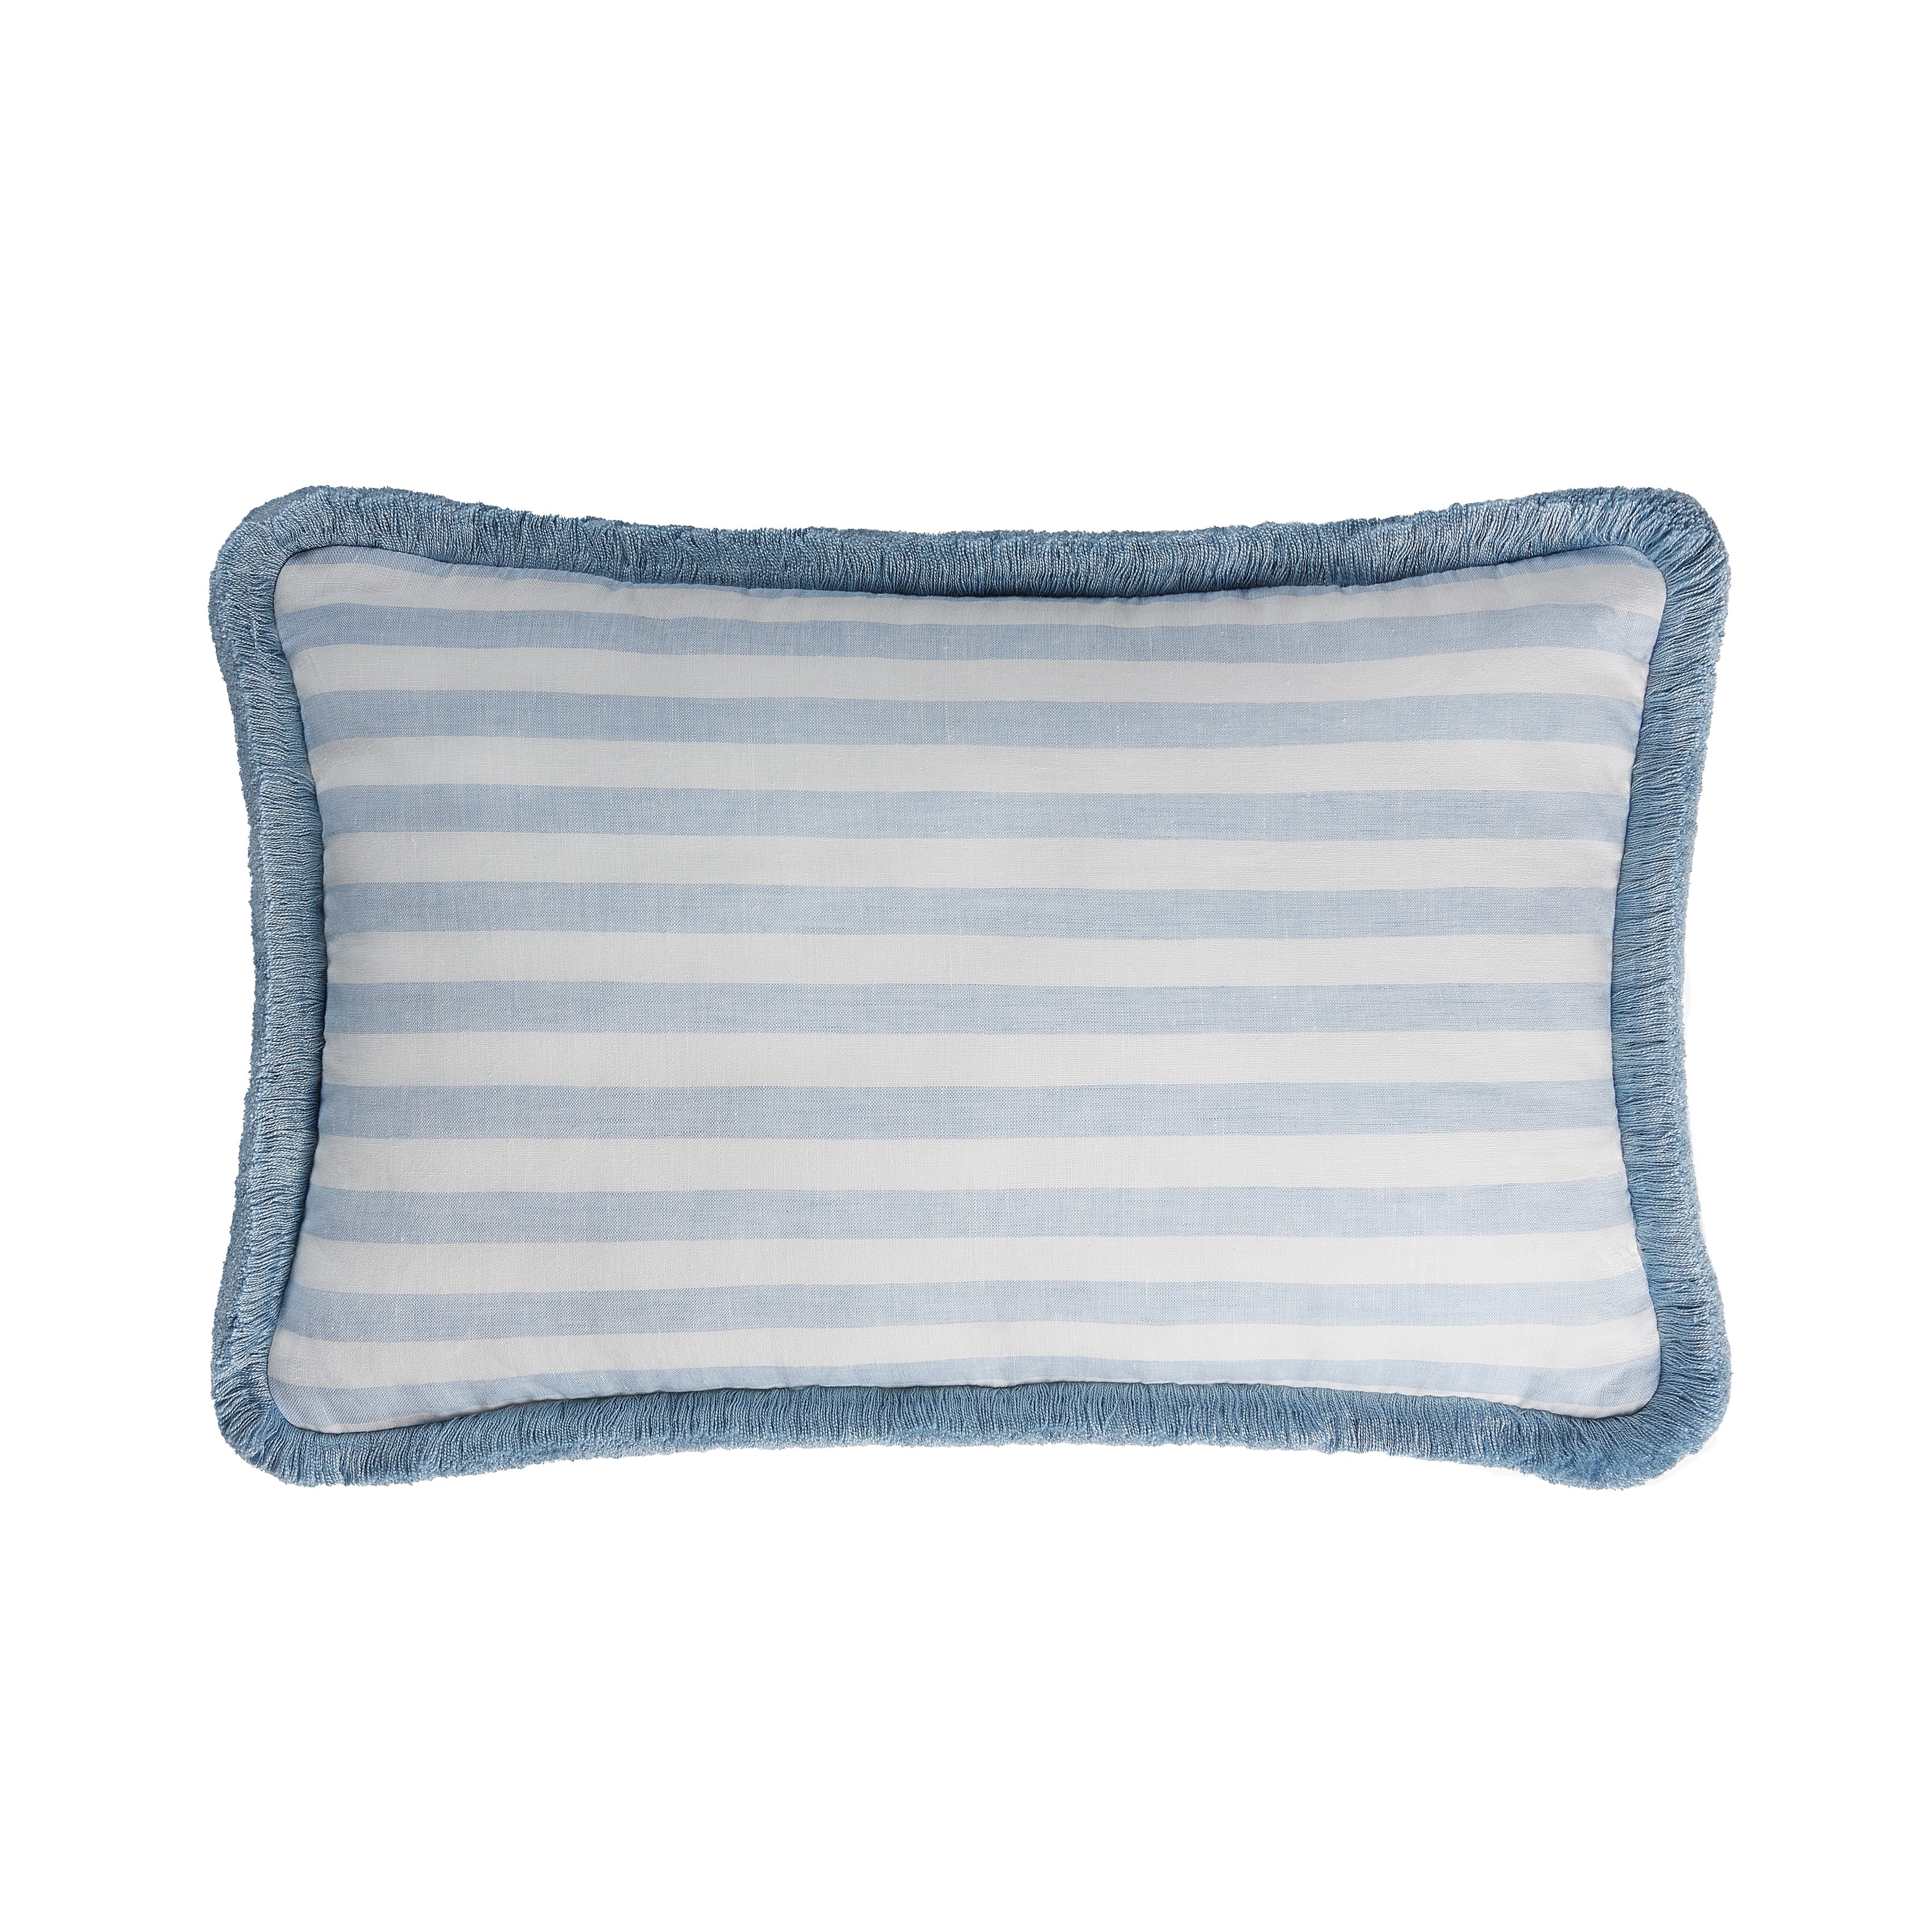 Happy Linen Pillow - Striped White & Light Blue with Cotton Fringes